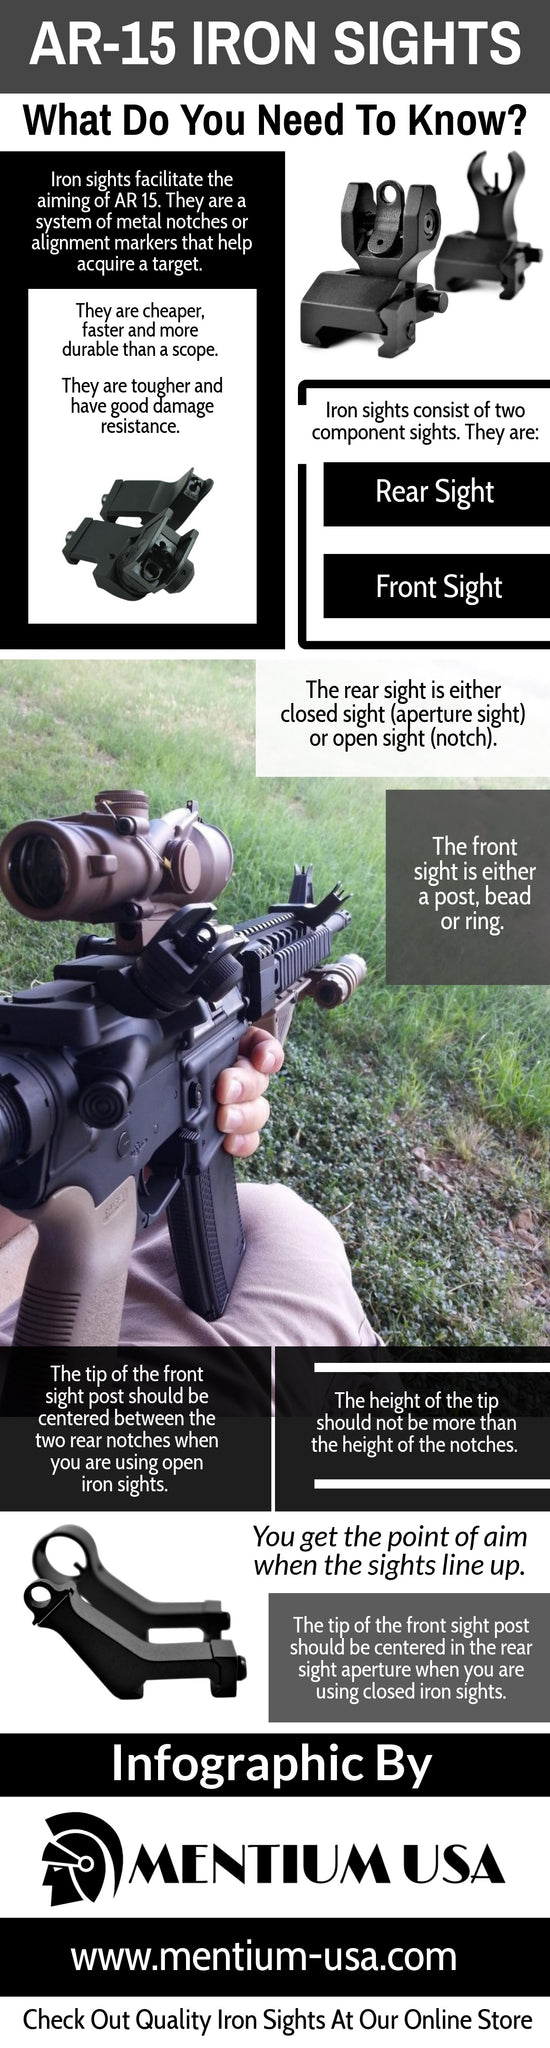 Image showing infographic about Reflex sight